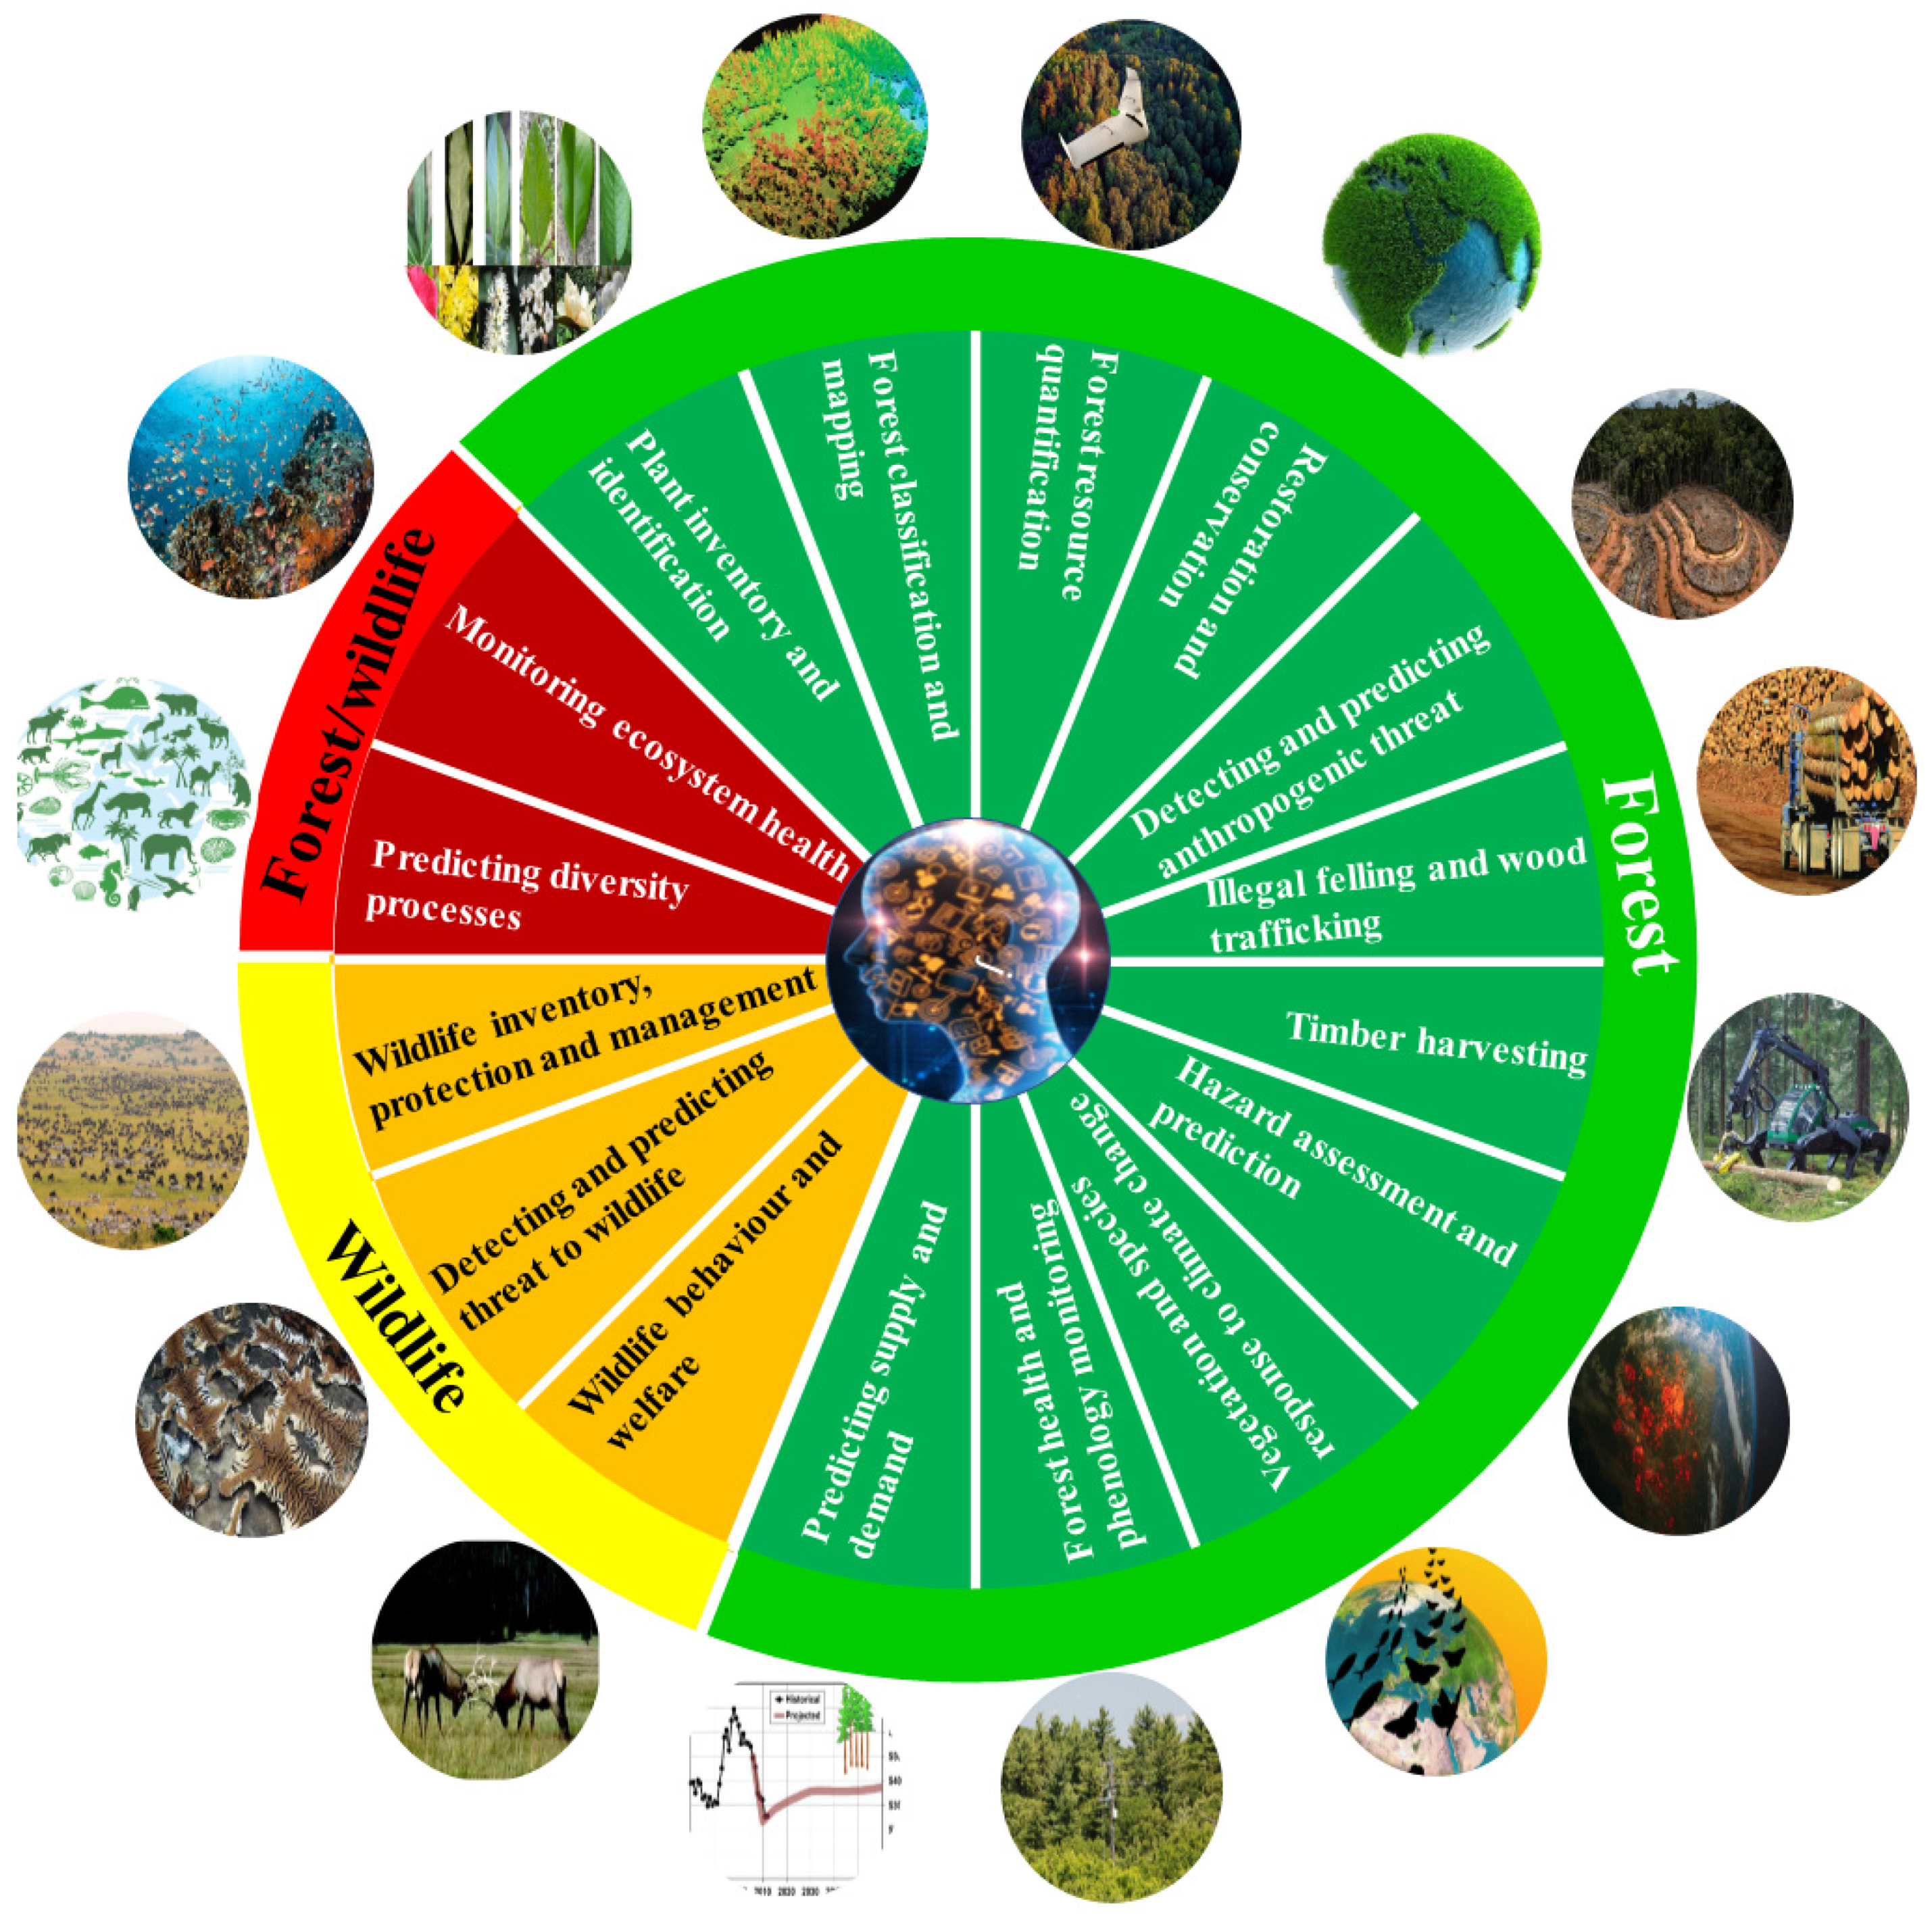 IV. Potential Negative Impacts of Green Energy on Wildlife and Biodiversity Conservation